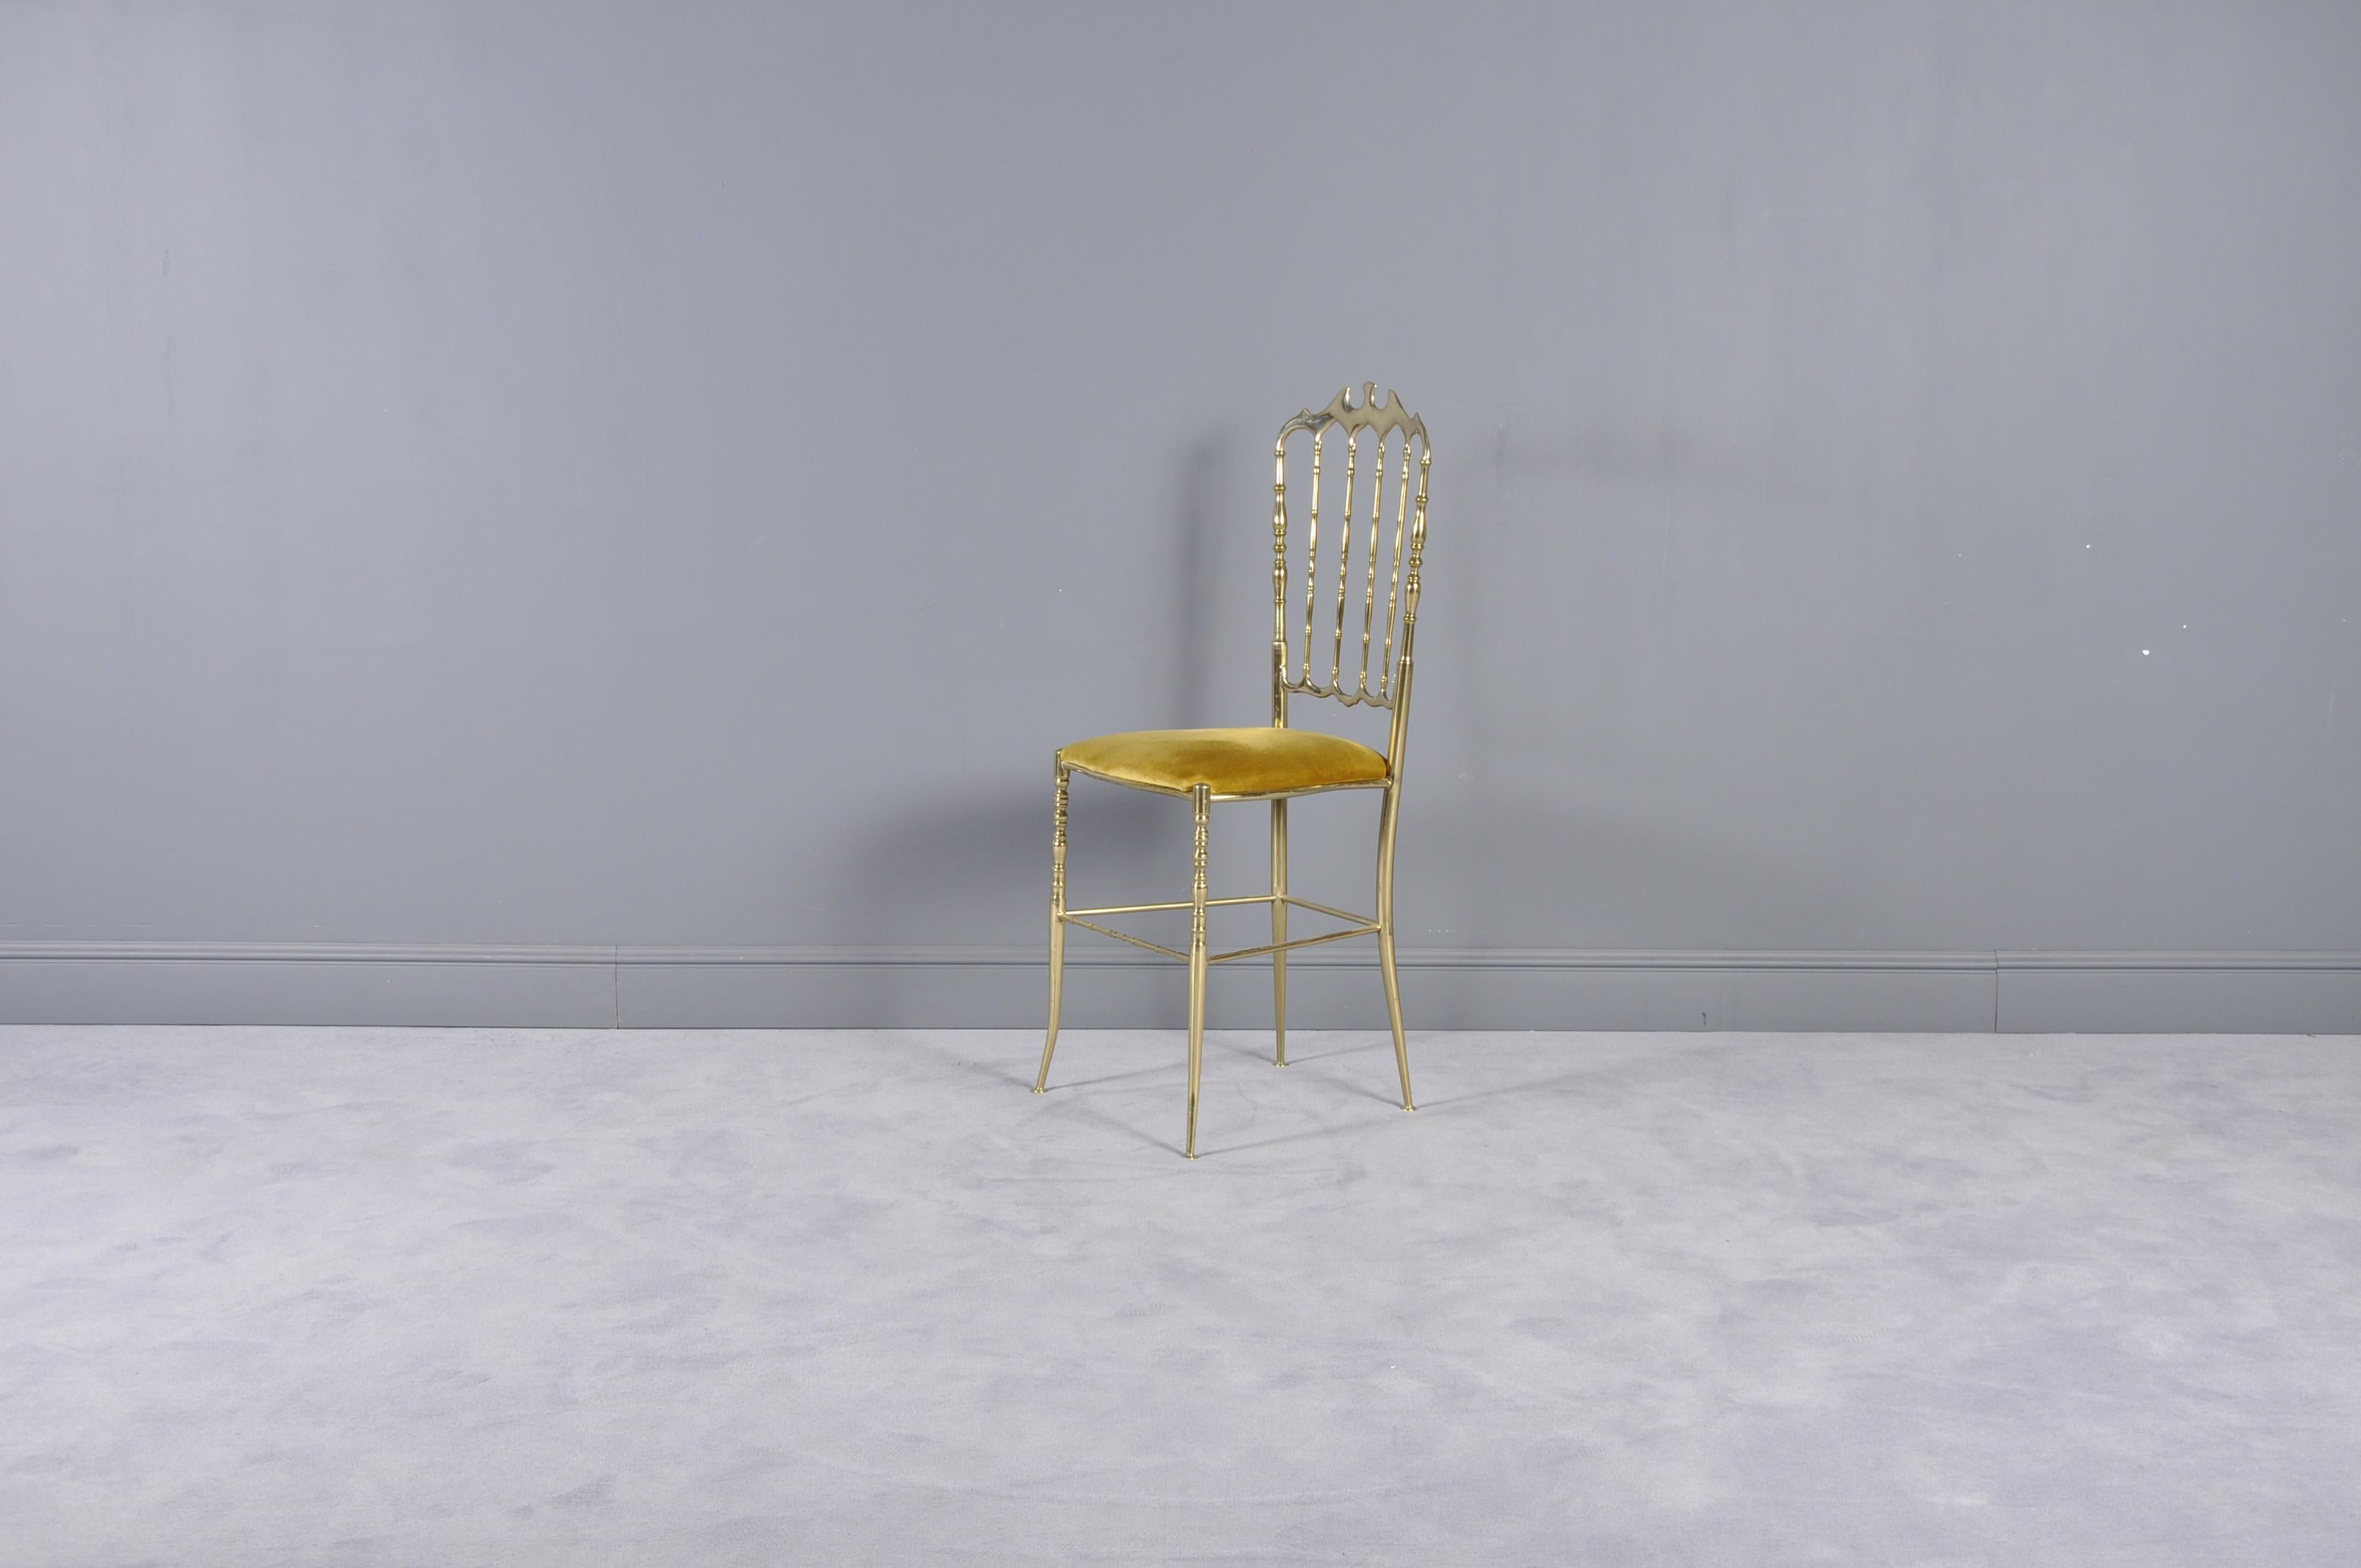 - Italian brass Chiavari chair
- Designed by Giuseppe Gaetano Descalzi
- Solid structure
- Yellow velvet upholstery
- Named after the Italian city where they originated (a small town located on the Mediterranean shore side between Portofino and